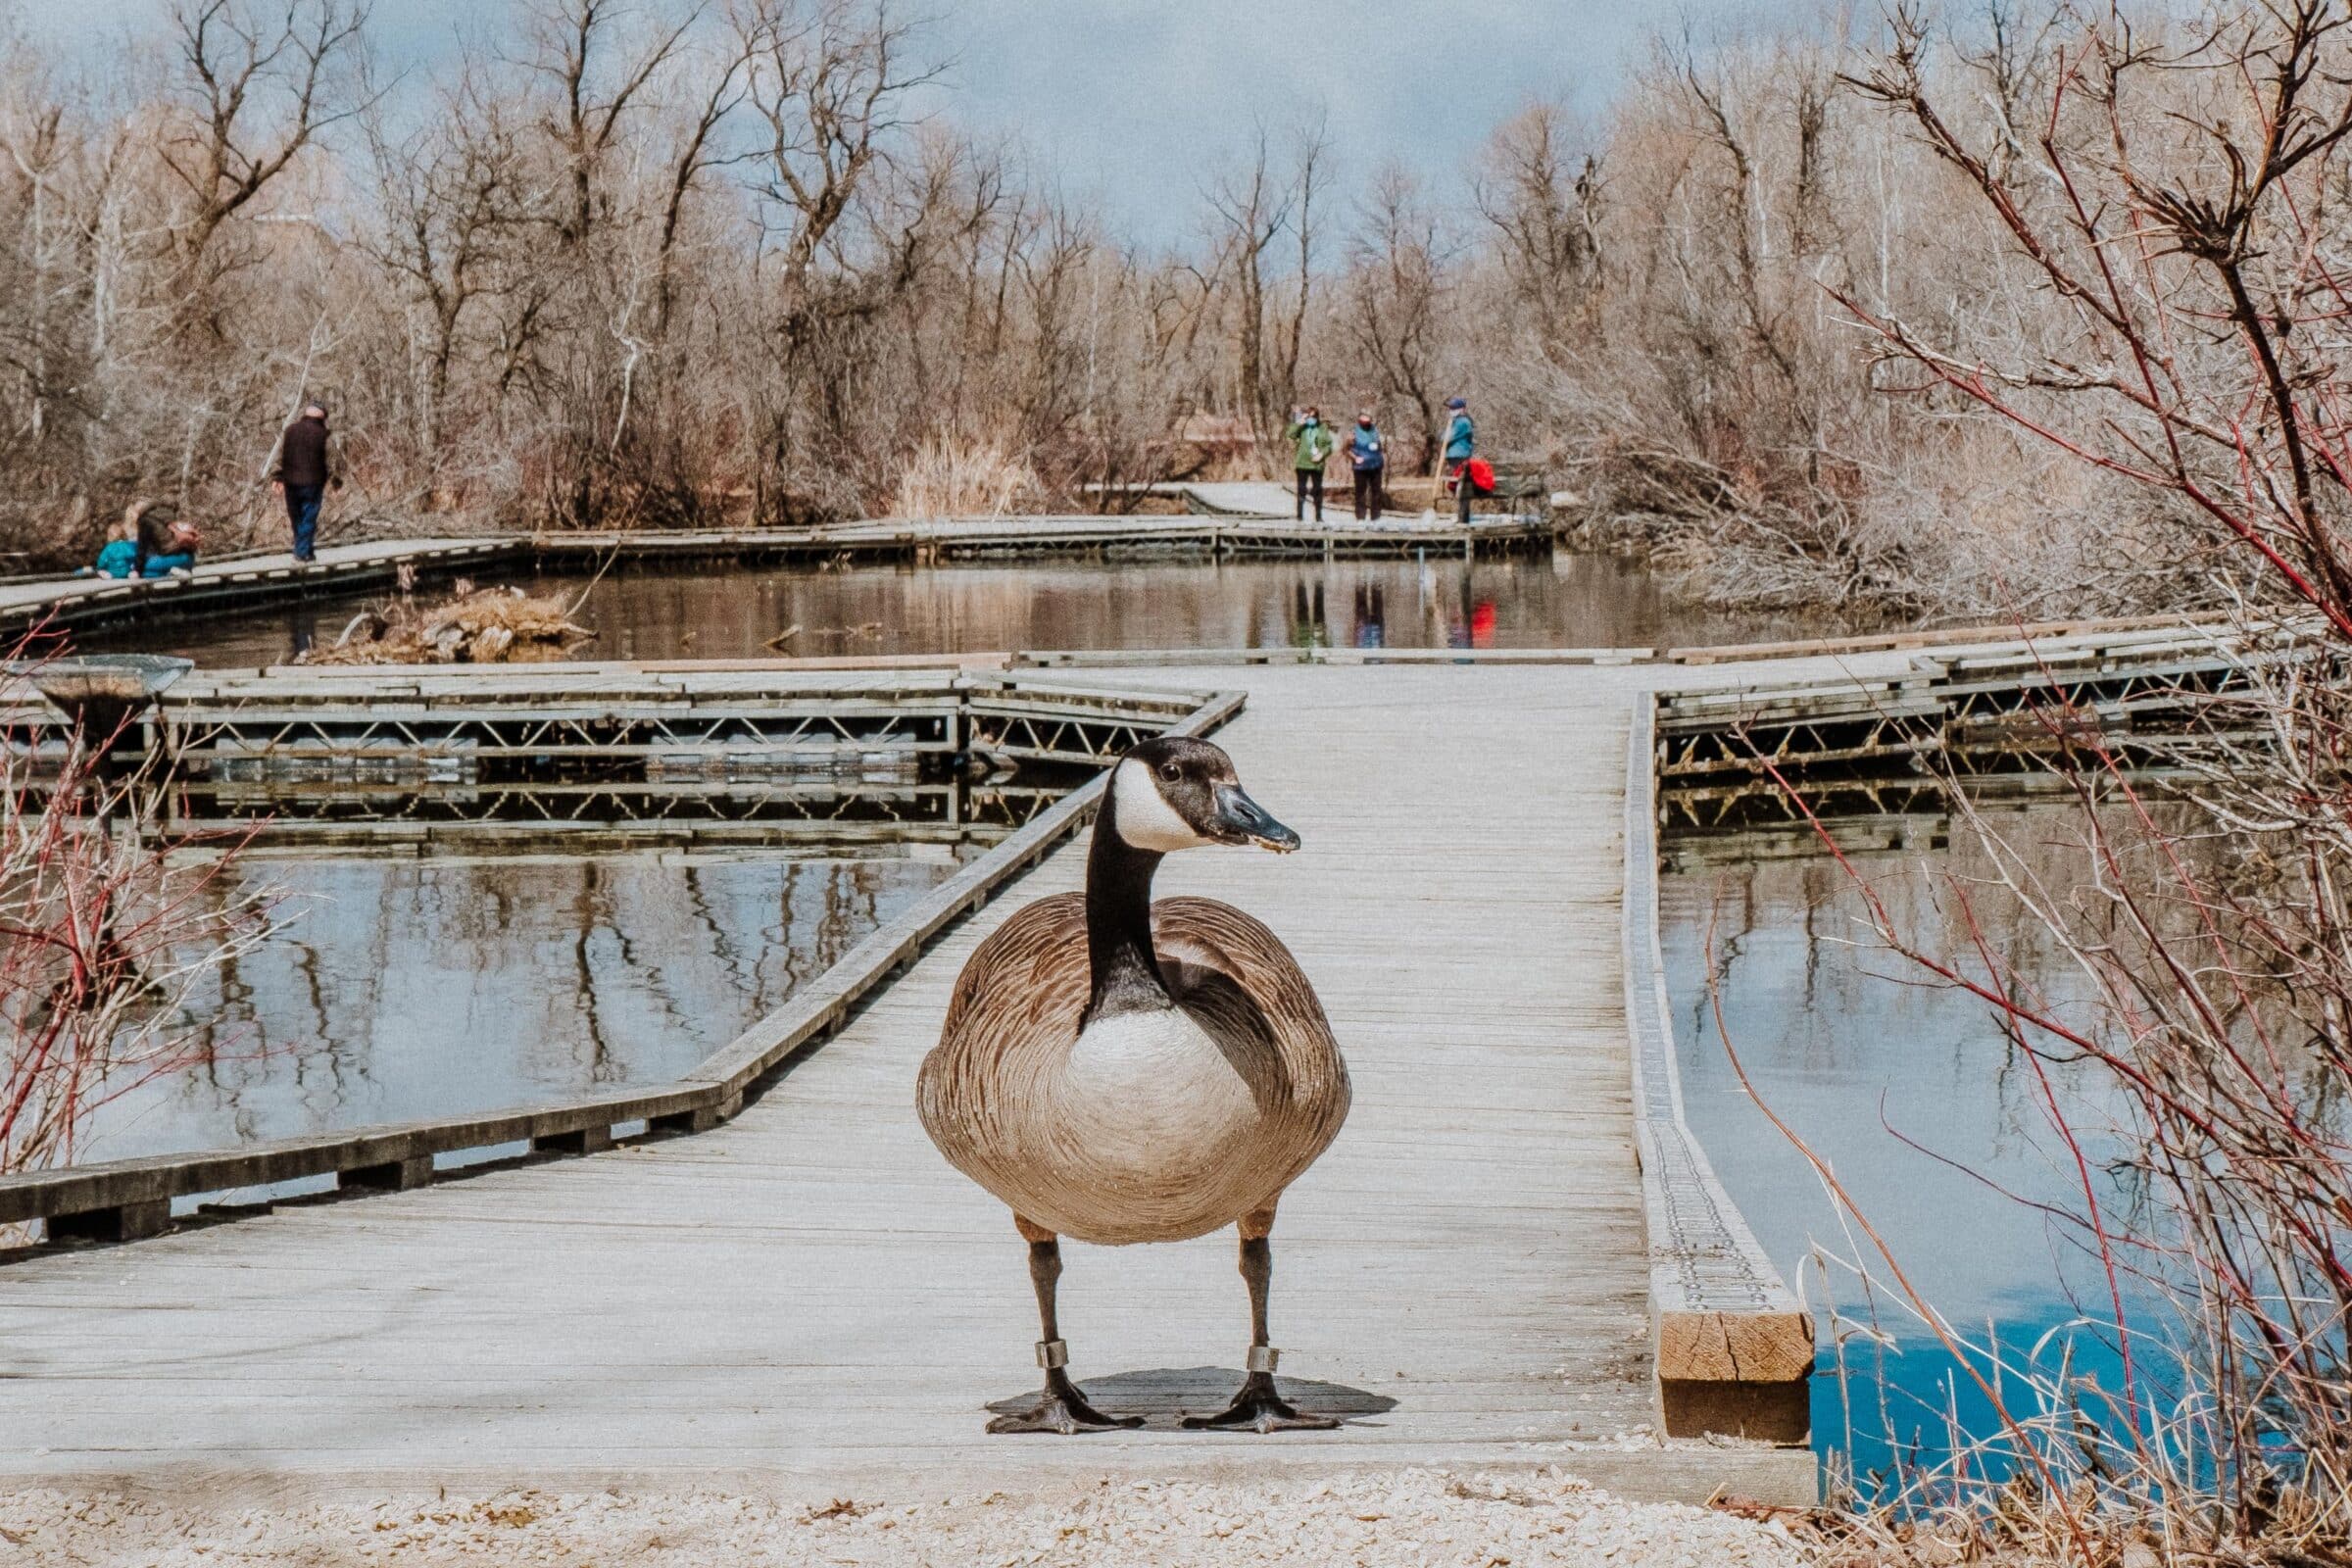 Canada Goose stands on a boardwalk with people in distance.